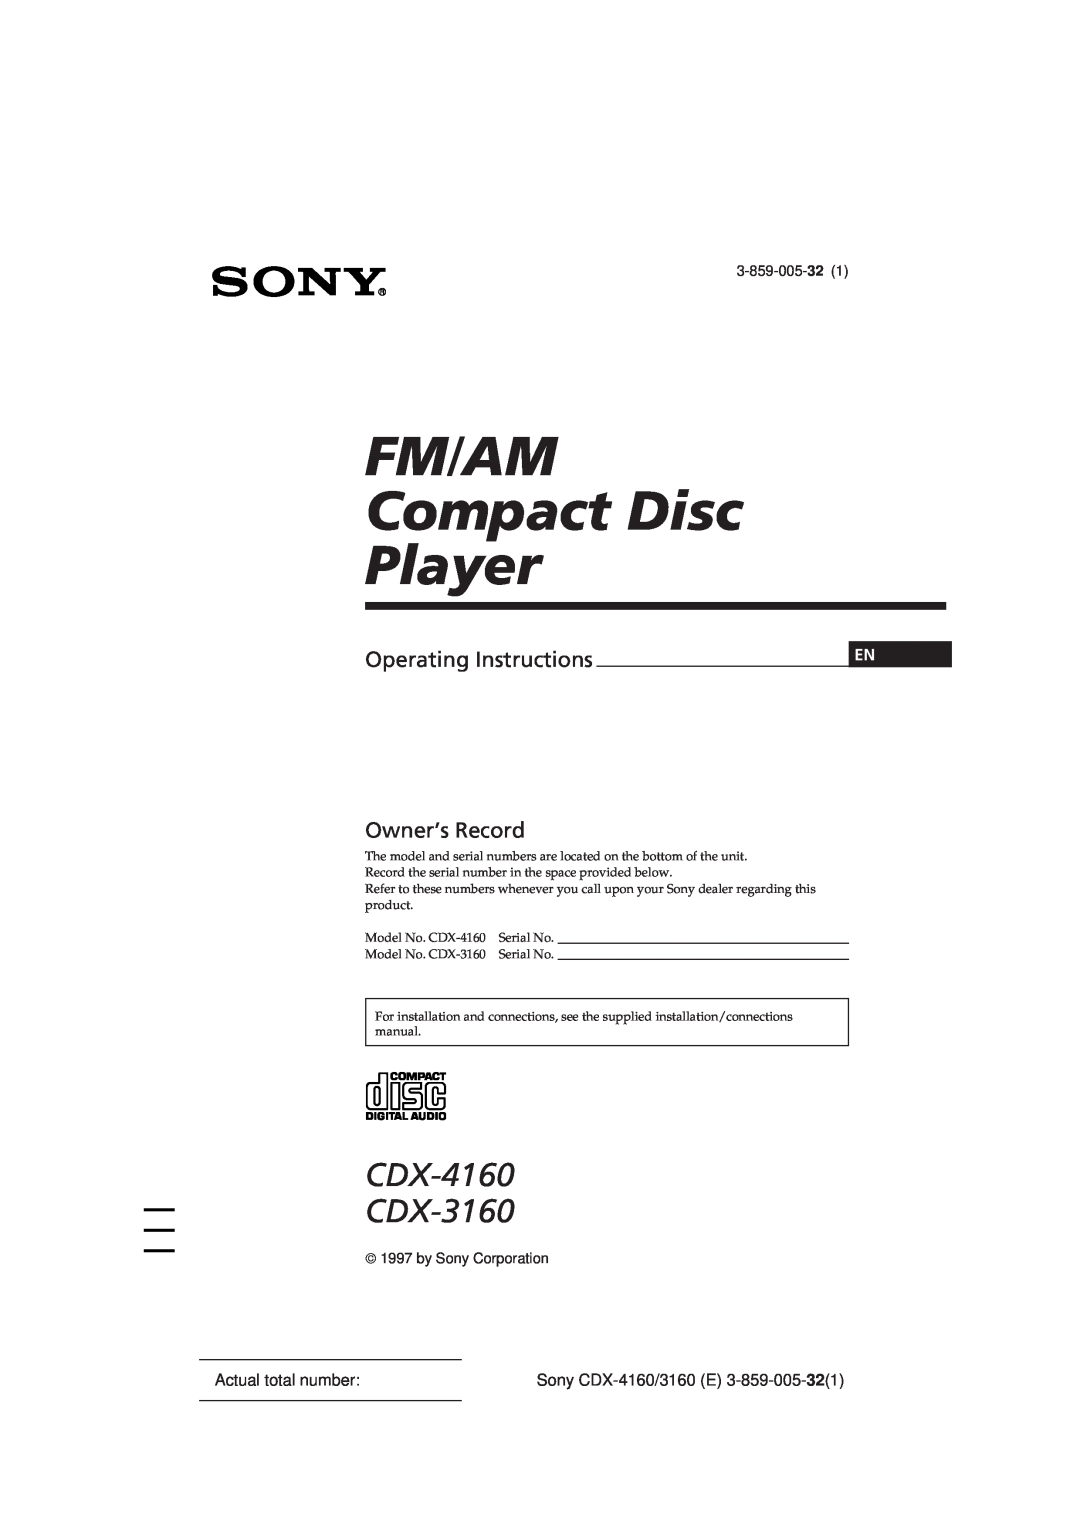 Sony 0 CDX-3160 operating instructions Actual total number, 3-859-005-32, by Sony Corporation, Sony CDX-4160/3160E 